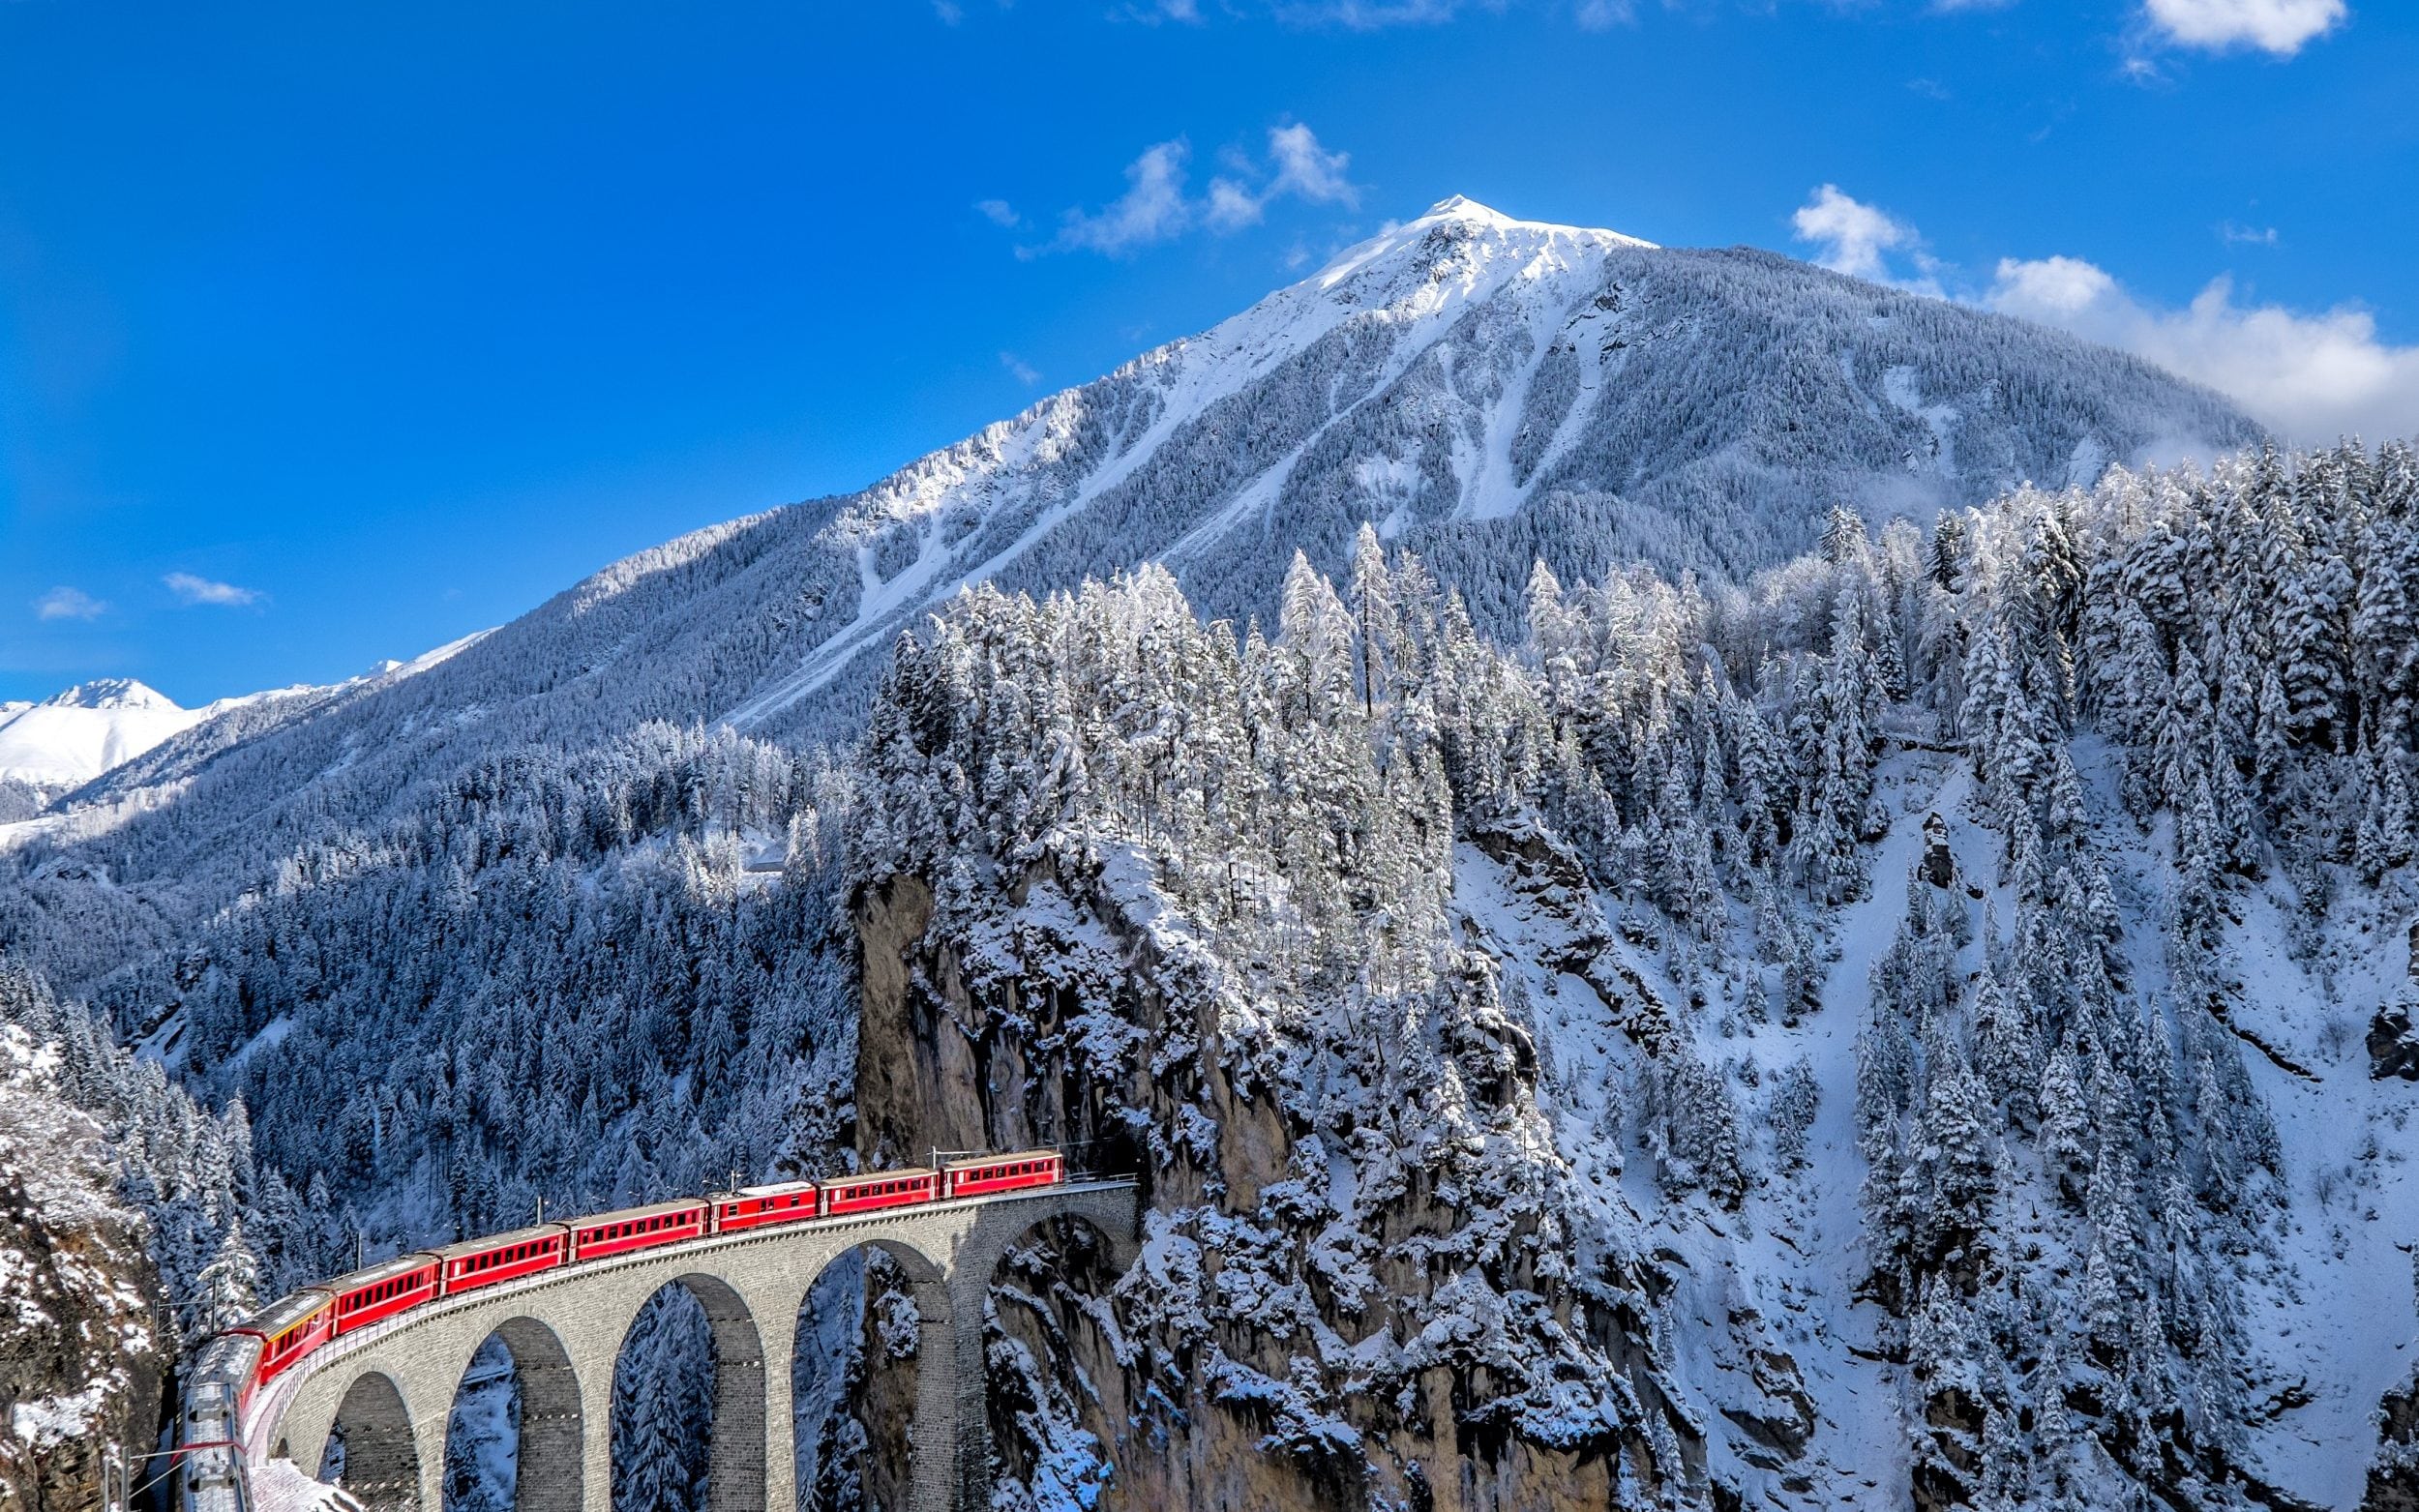 10 of europe’s greatest escorted rail trips